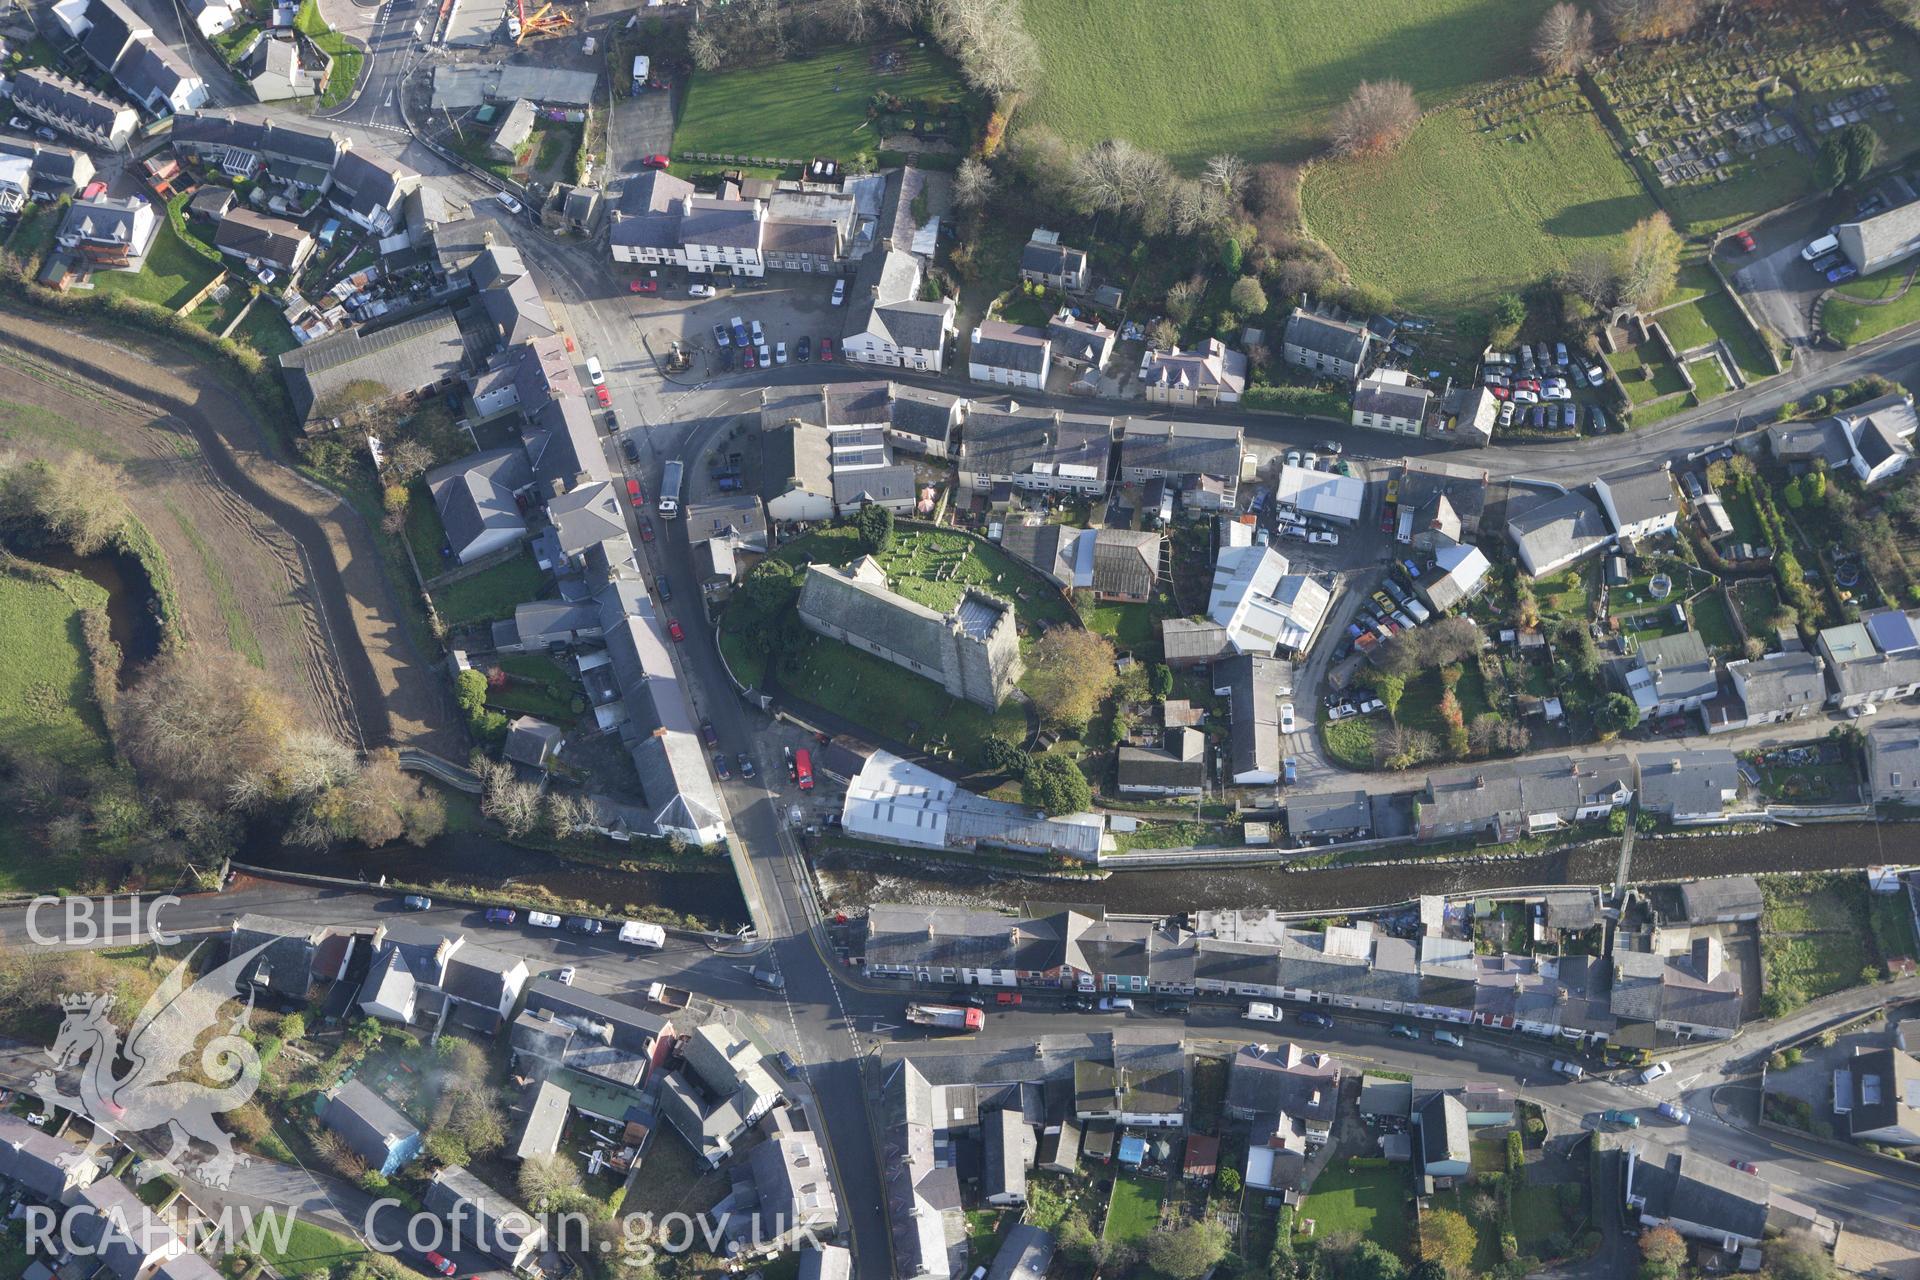 RCAHMW colour oblique aerial photograph of Tregaron. Taken on 09 November 2009 by Toby Driver